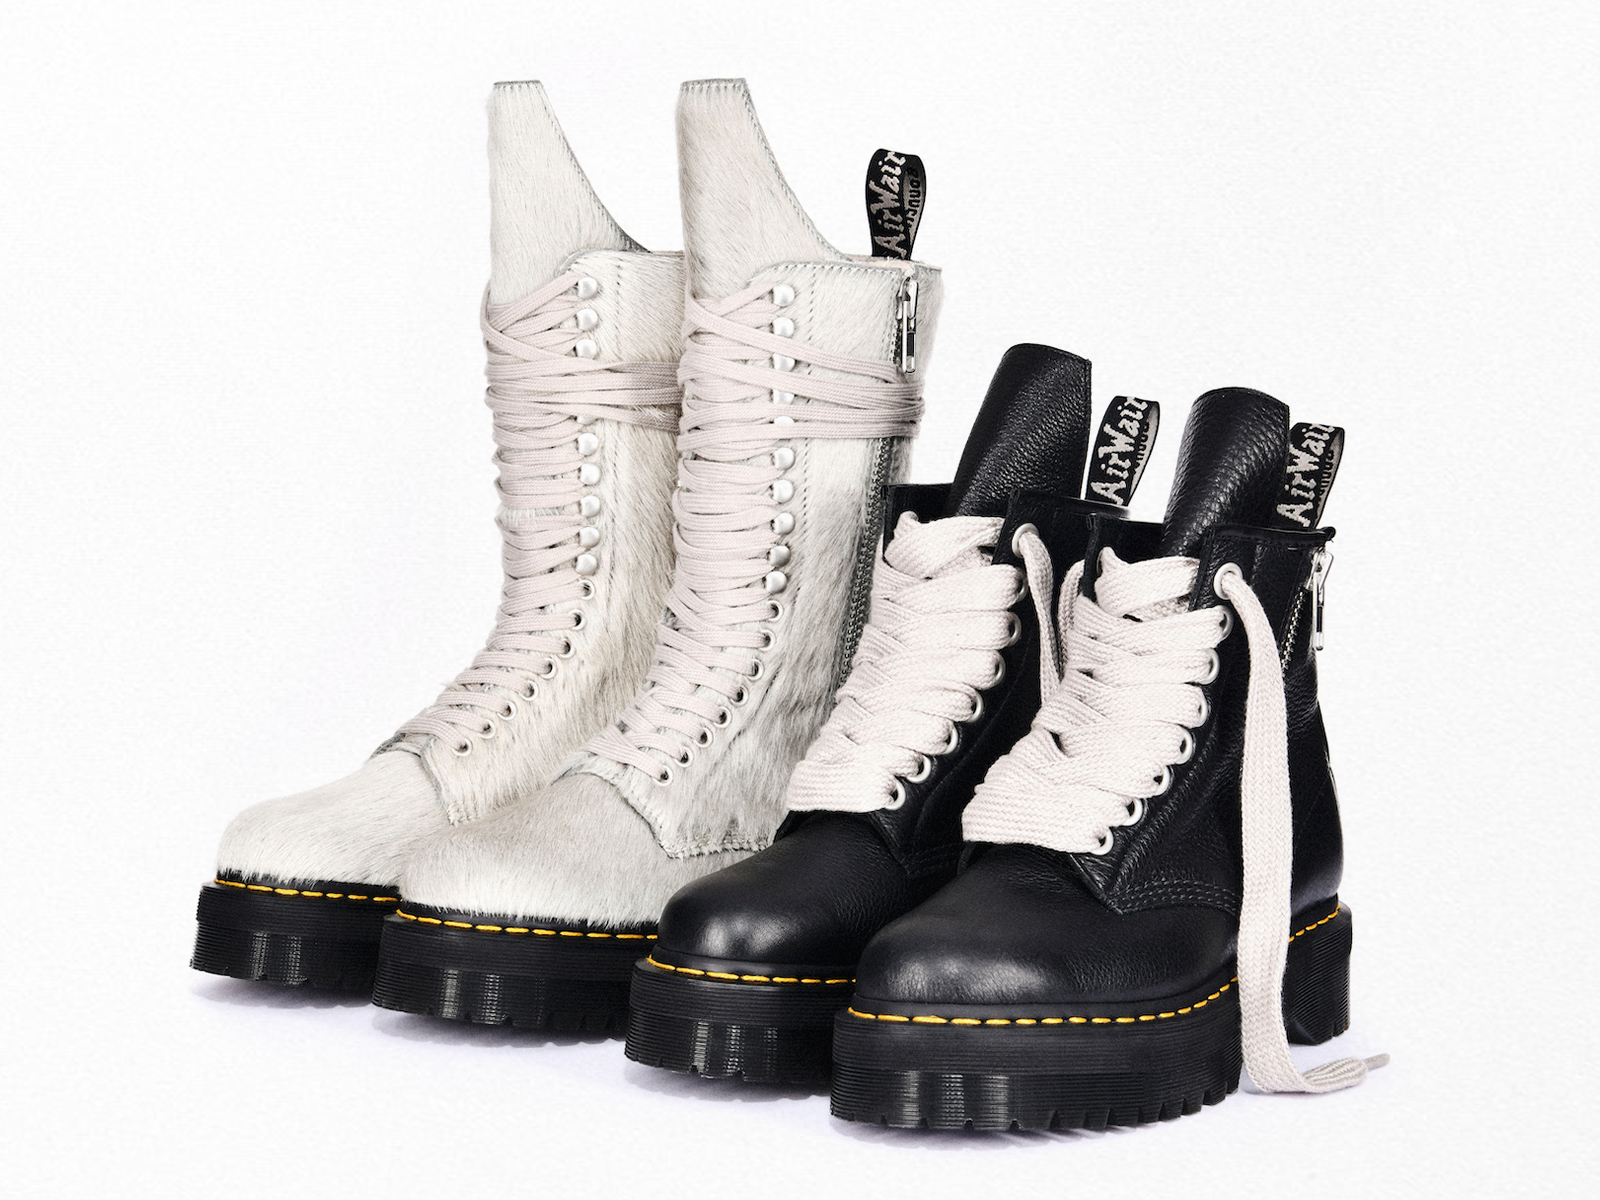 Dr. Martens teams up with Rick Owens to re-sculpt silhouettes